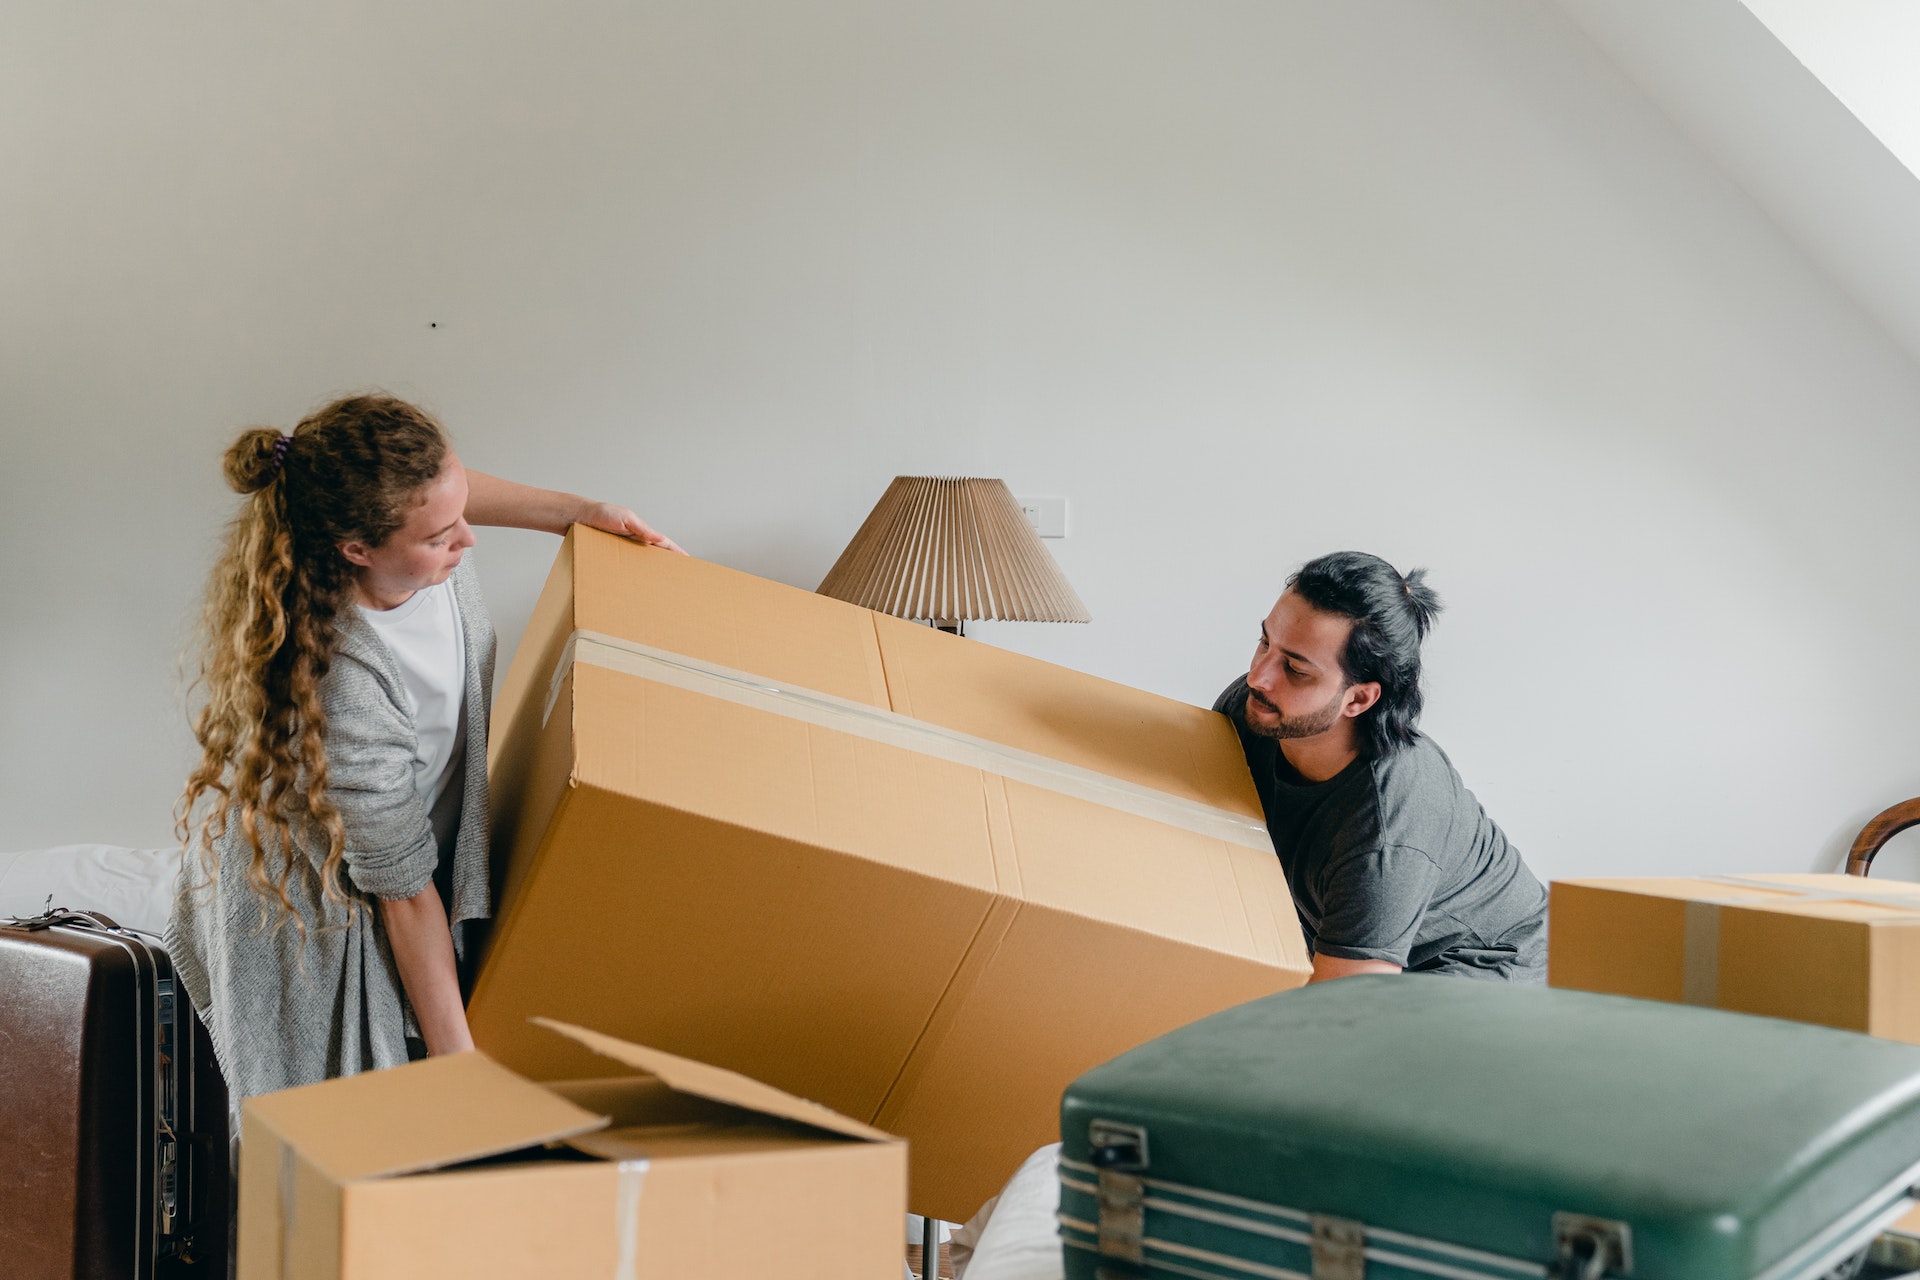 Eco-Friendly Moving Tips